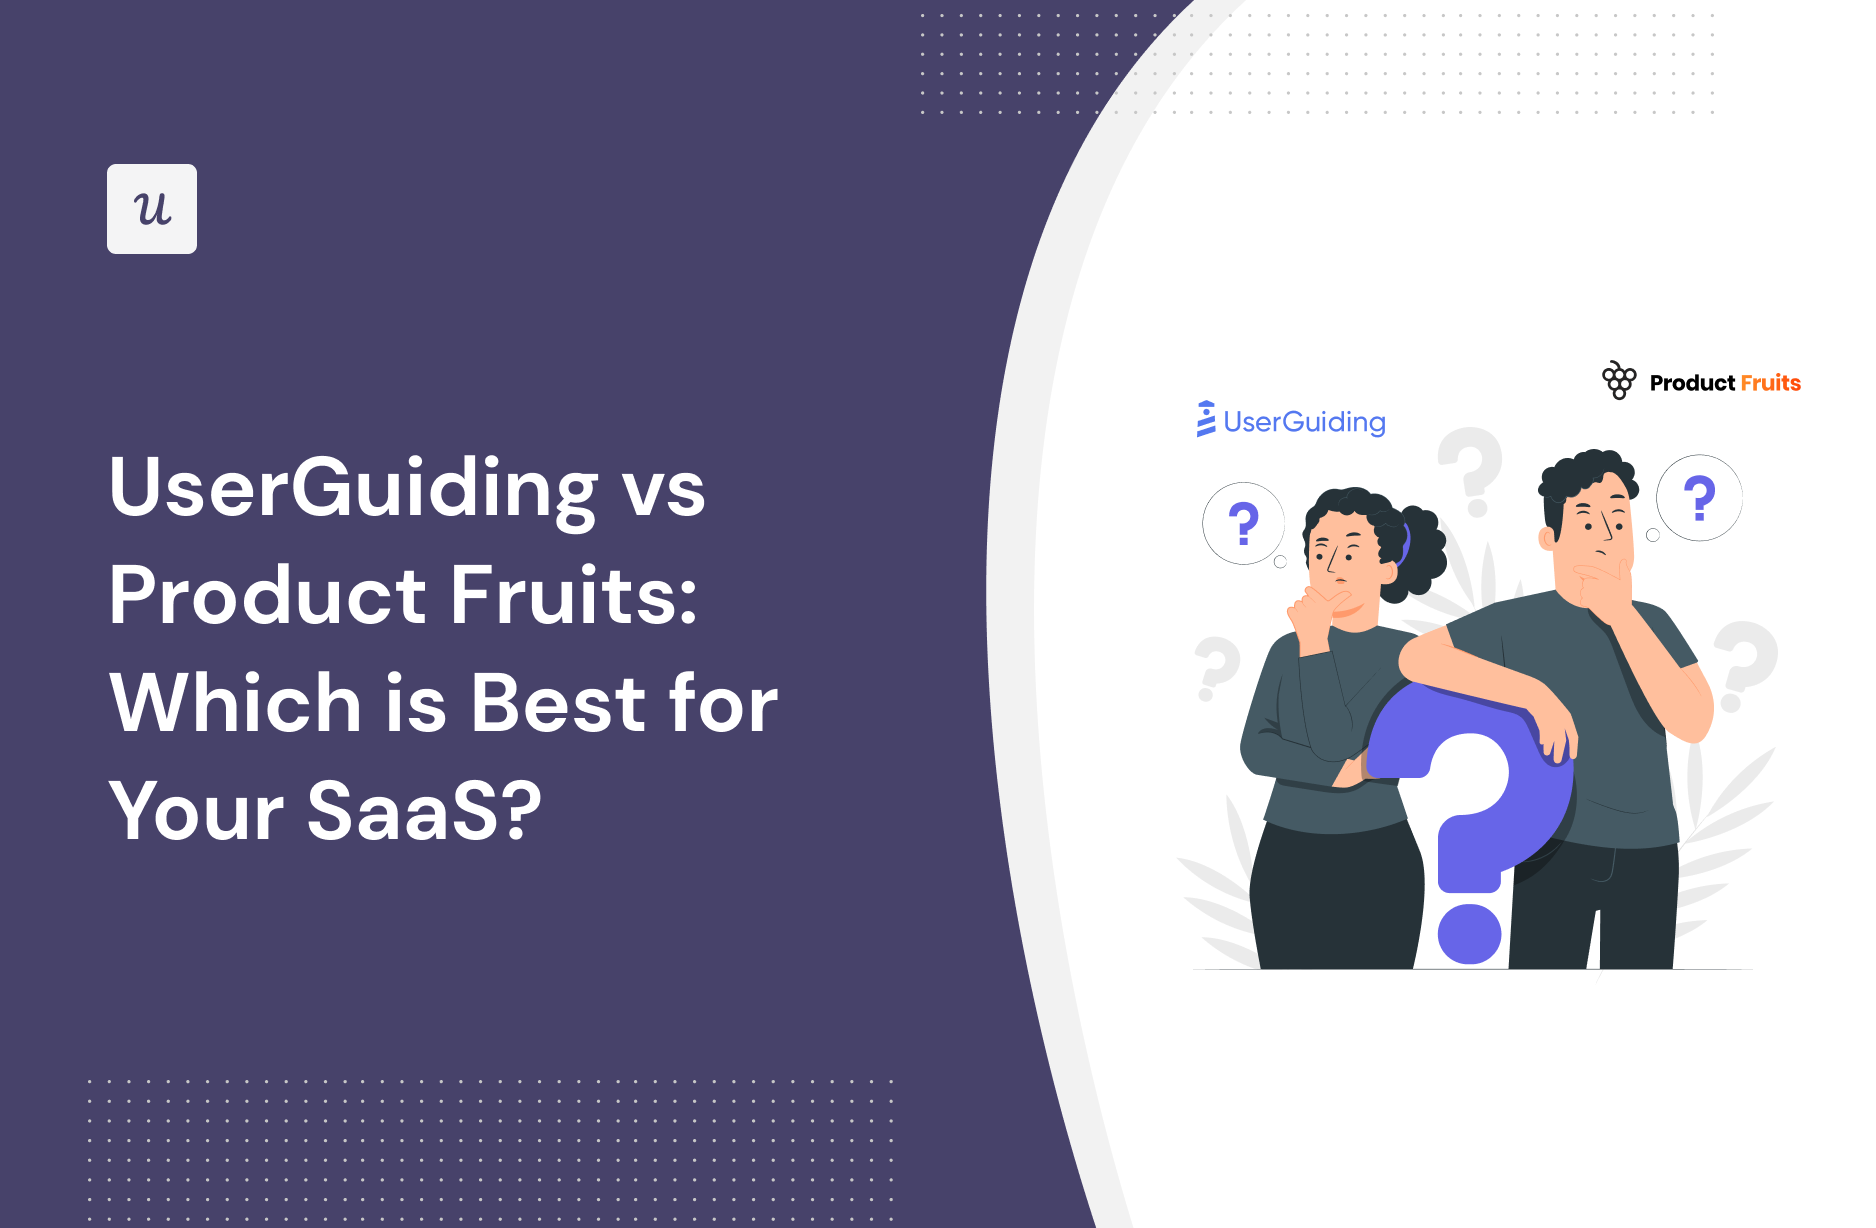 UserGuiding vs Product Fruits: Which Is Best for Your SaaS?